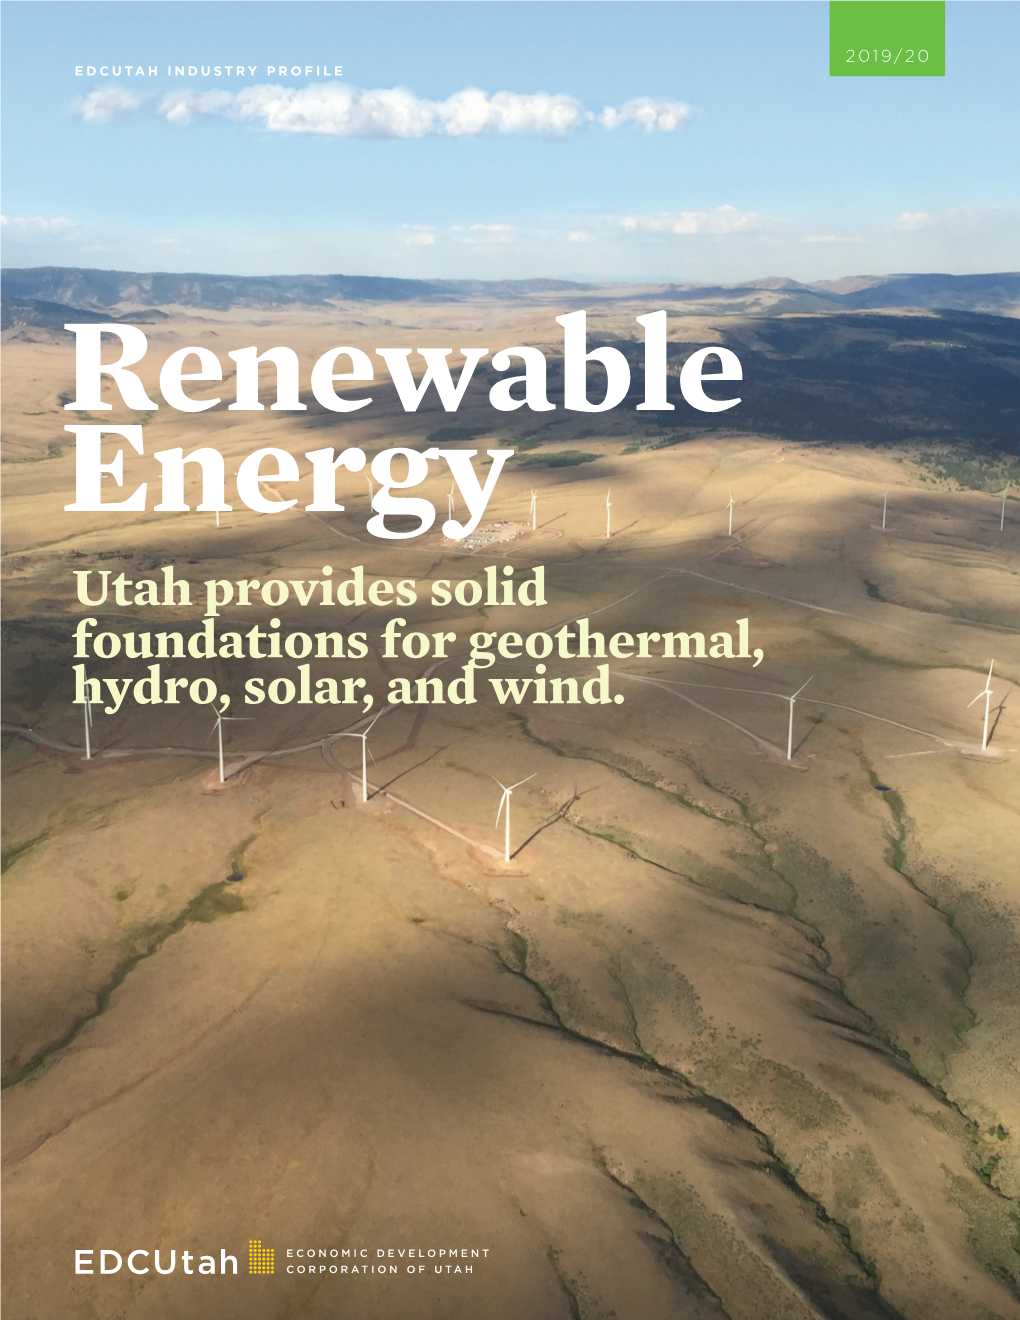 Utah Provides Solid Foundations for Geothermal, Hydro, Solar, and Wind